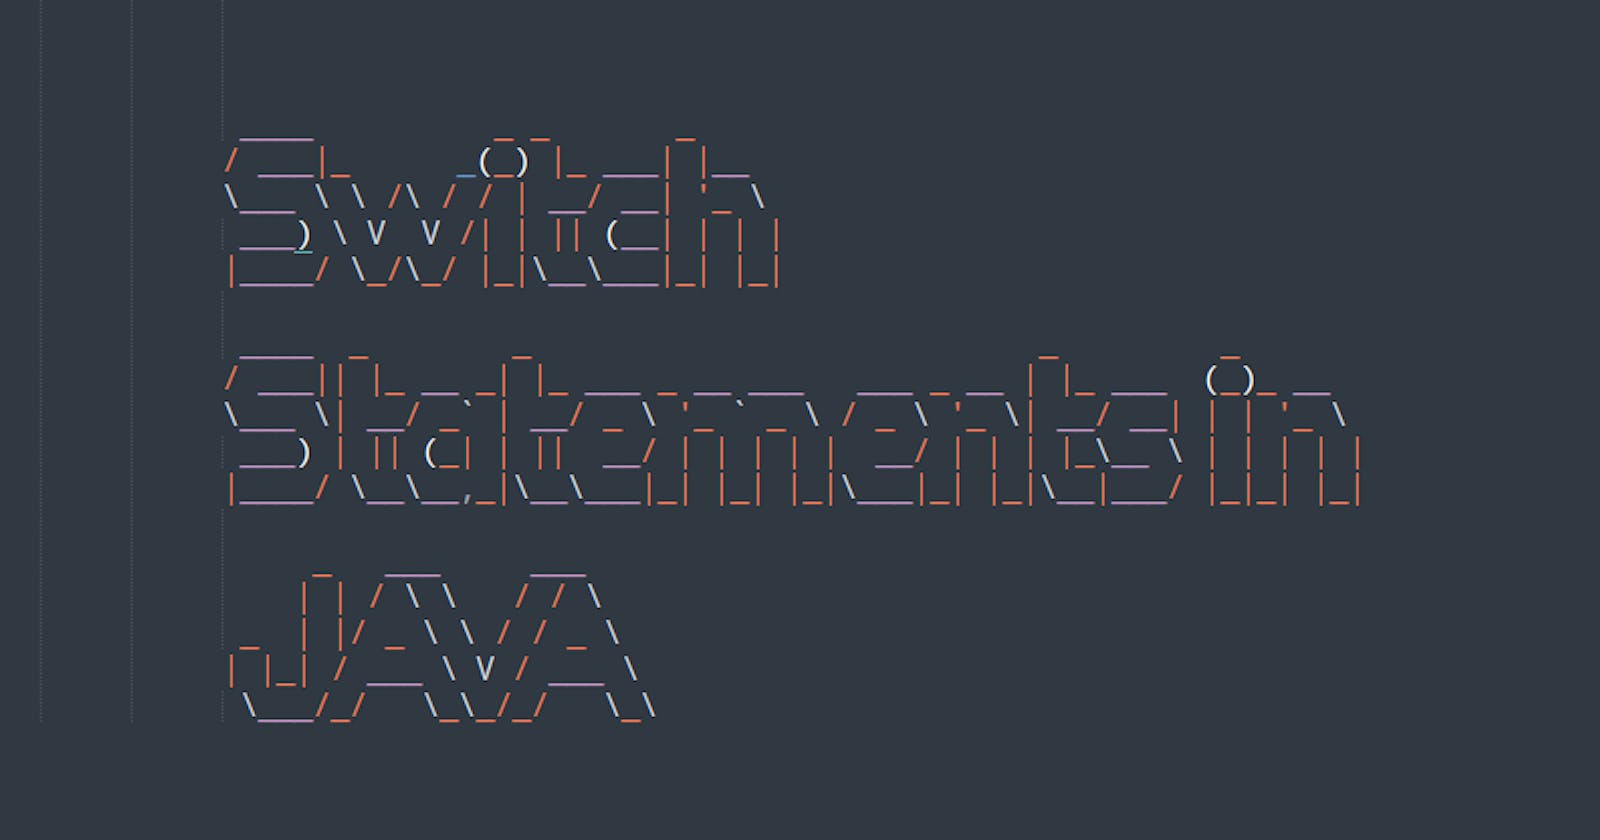 Switch Statements in JAVA